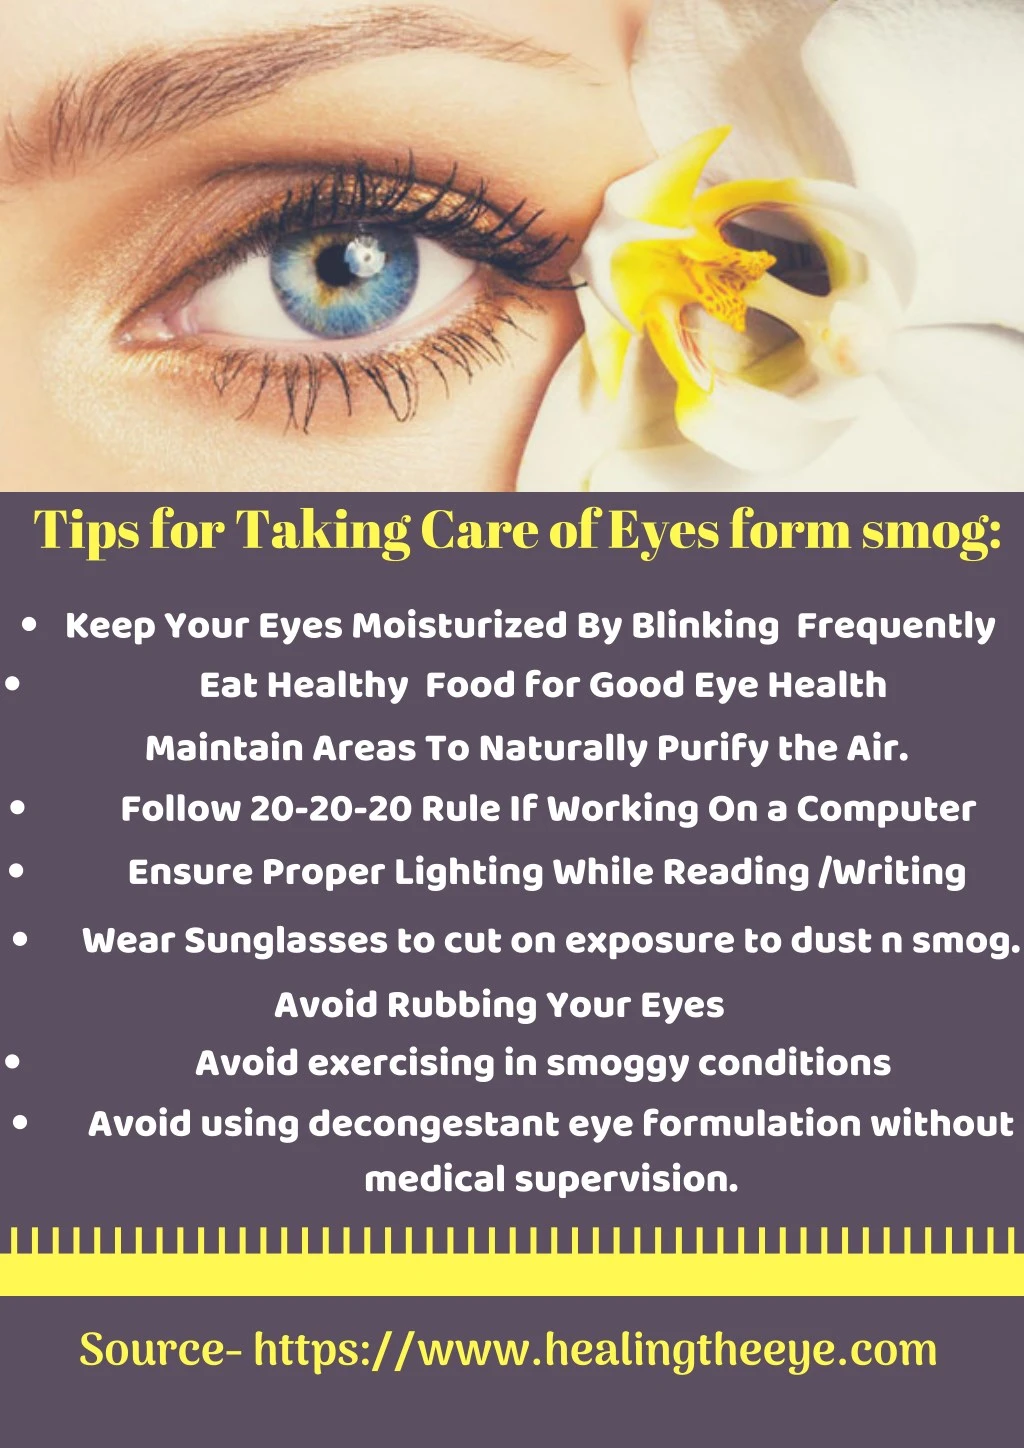 tips for taking care of eyes form smog